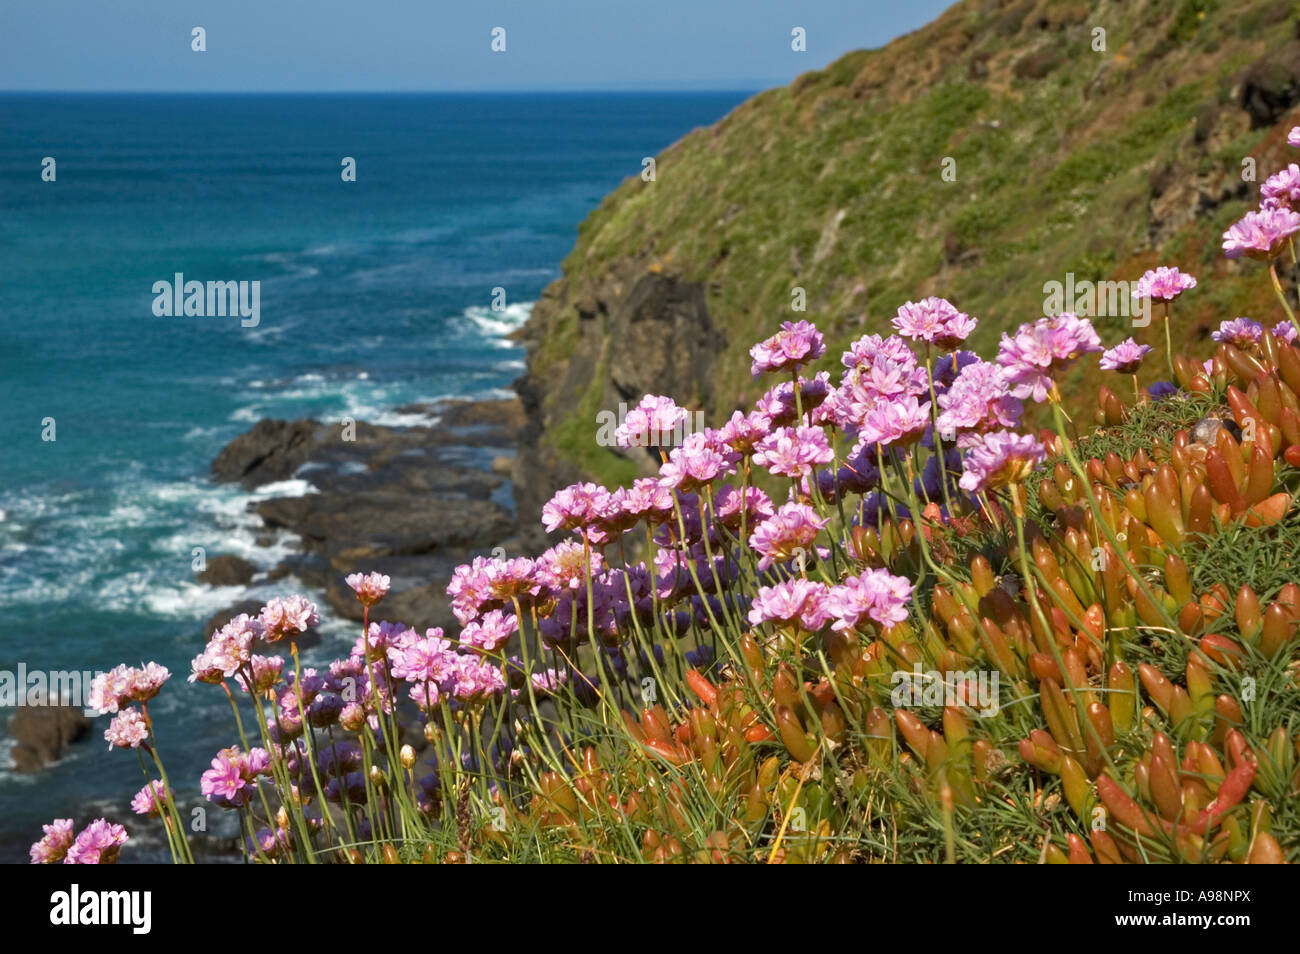 thrift or sea pinks flowering in the spring sunshine on the coastal cliffs of cornwall,england Stock Photo